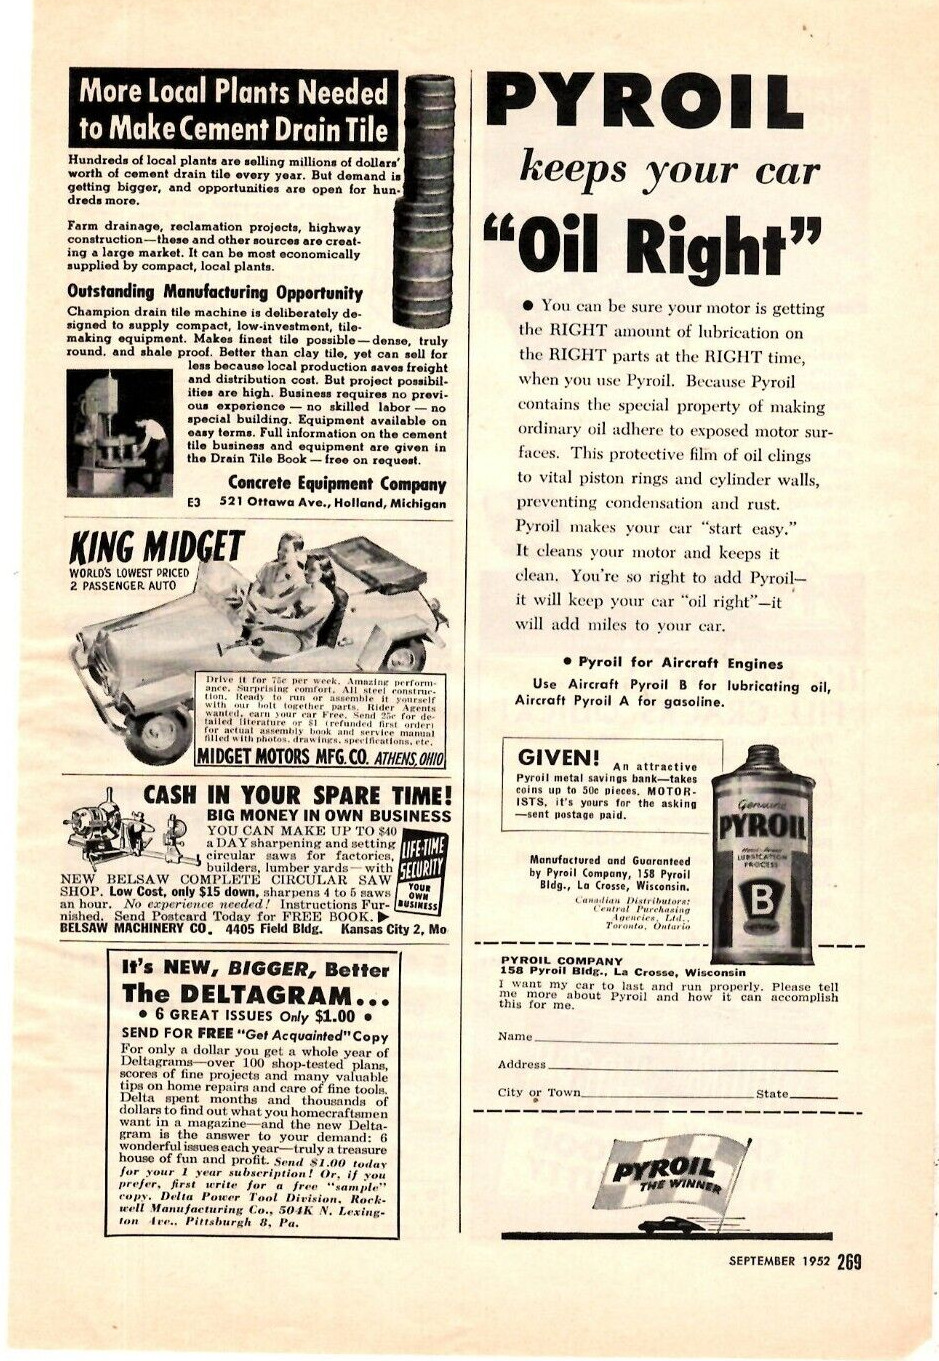 1952 Print Ad Pyroil Motor Oil Keeps Your Car \